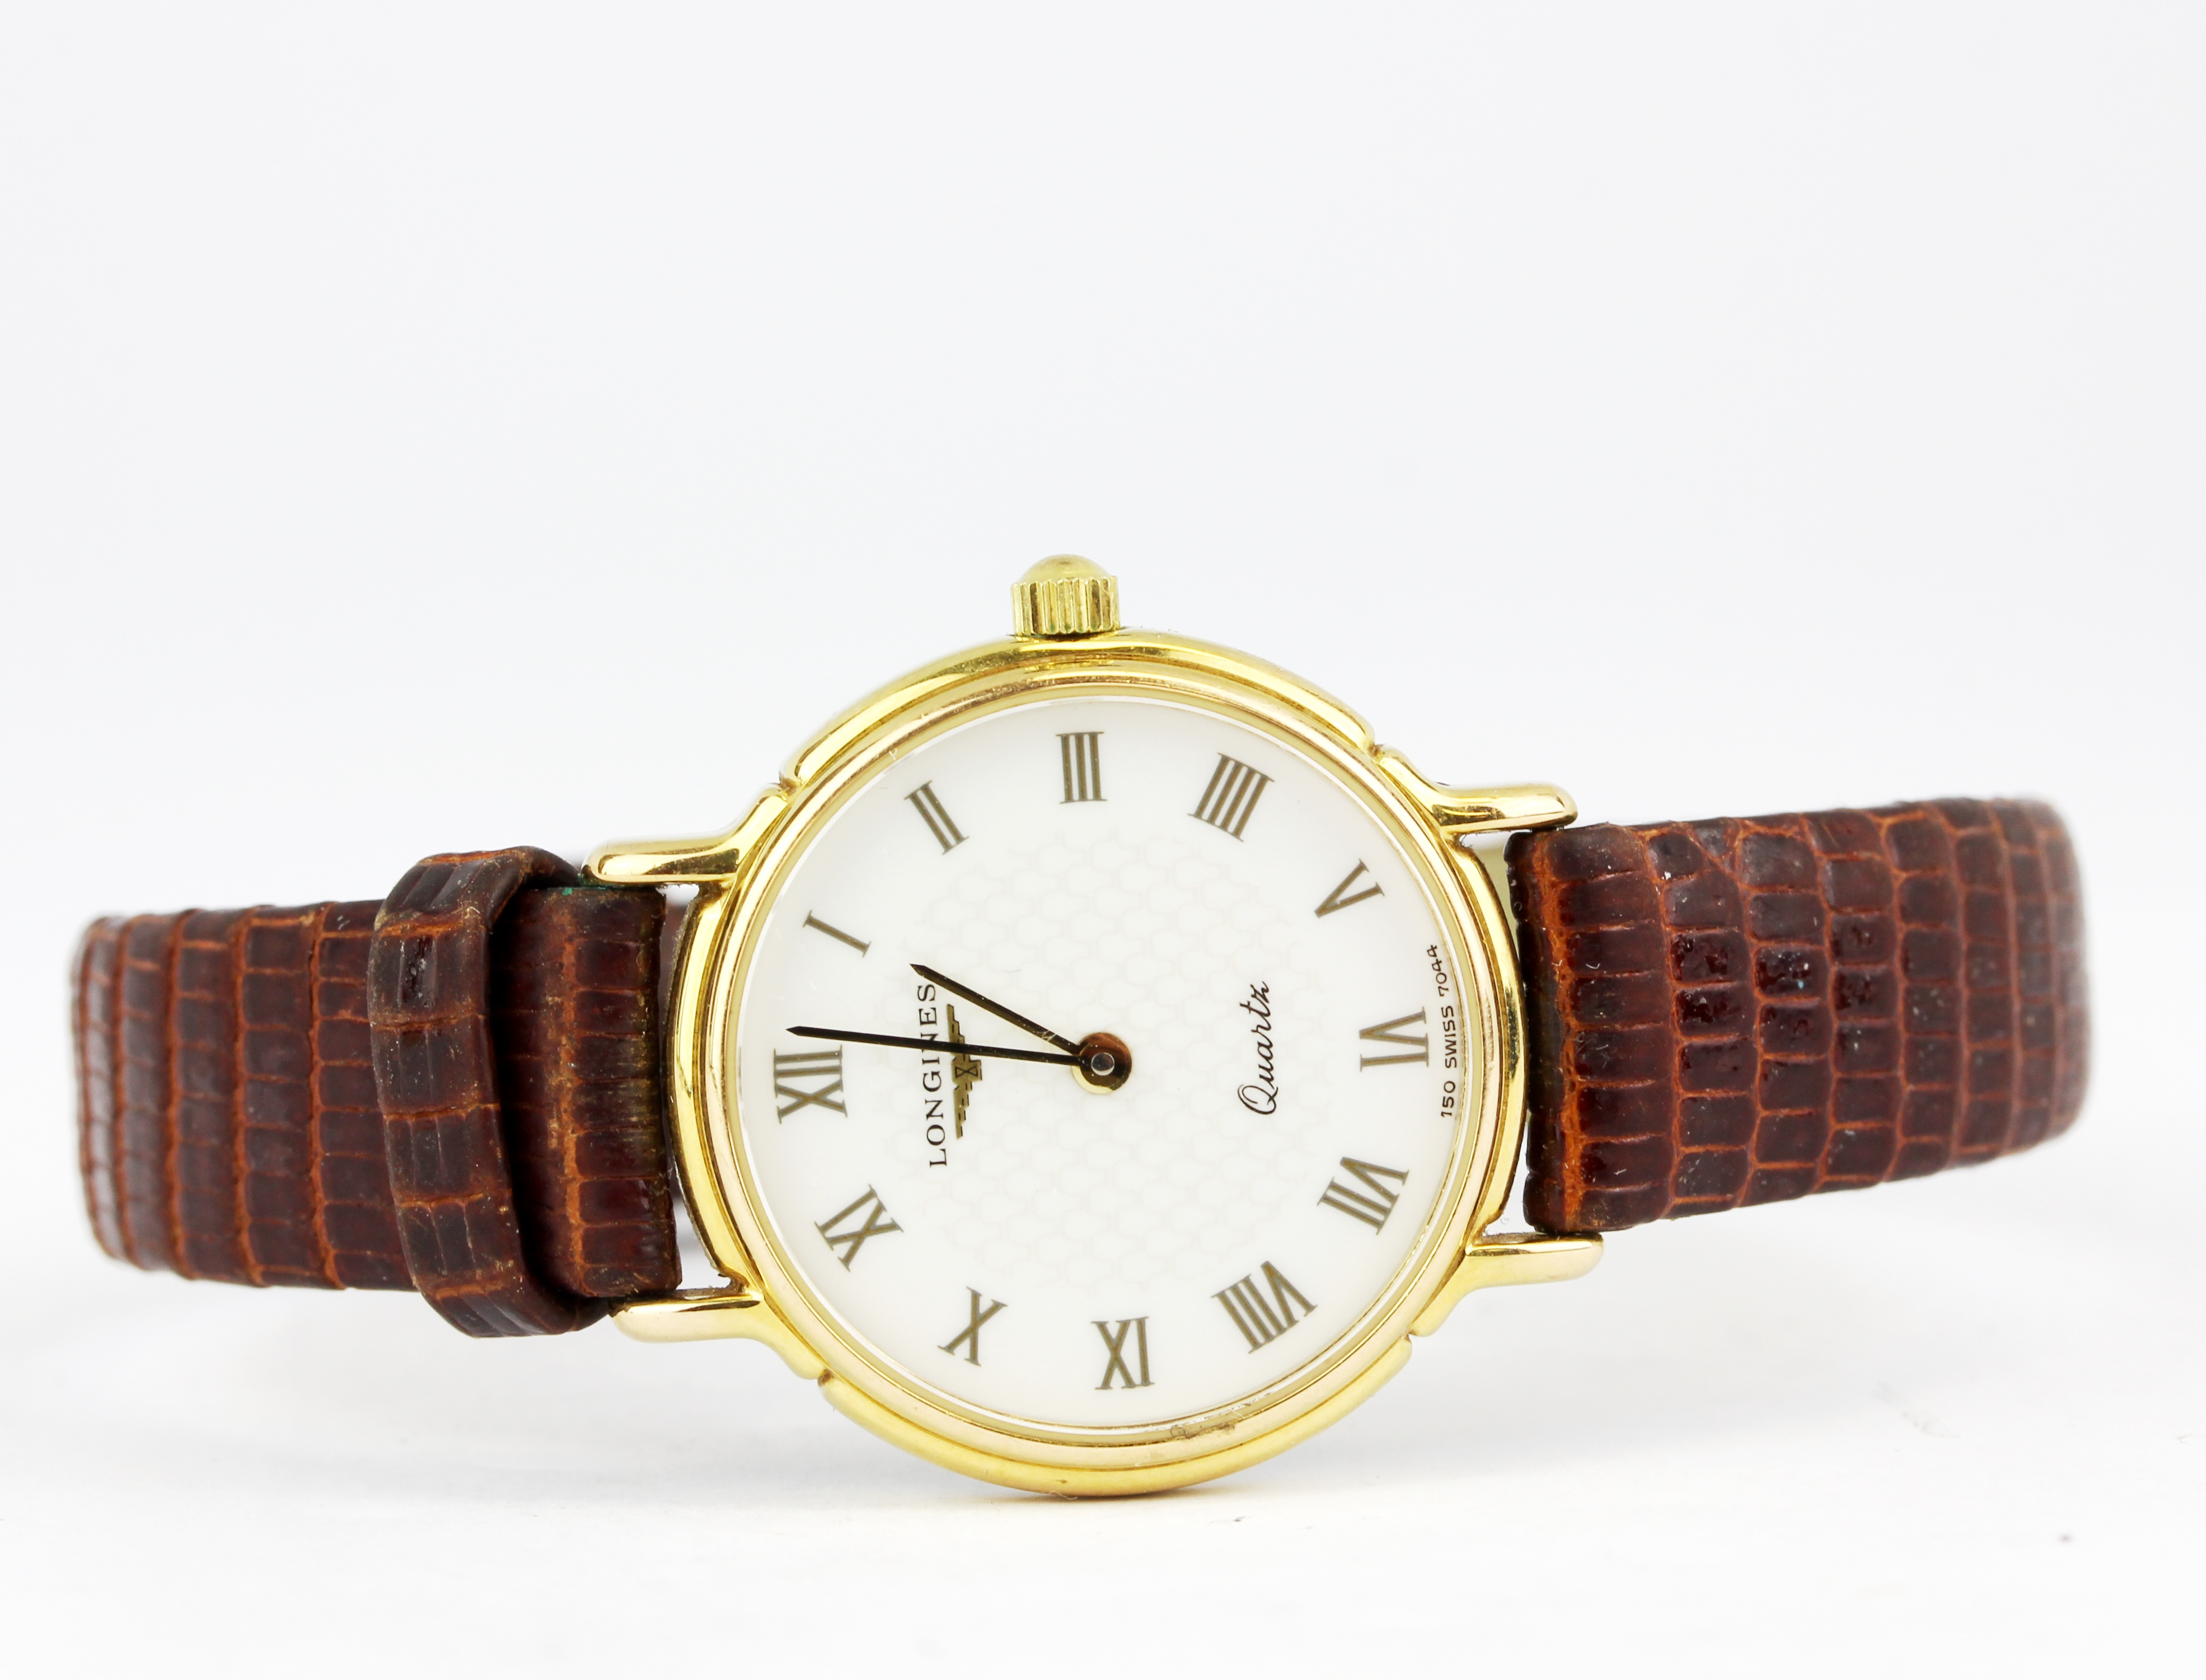 A Longines gold plated wristwatch (no. 24445181 7044) on a brown leather strap. - Image 2 of 5